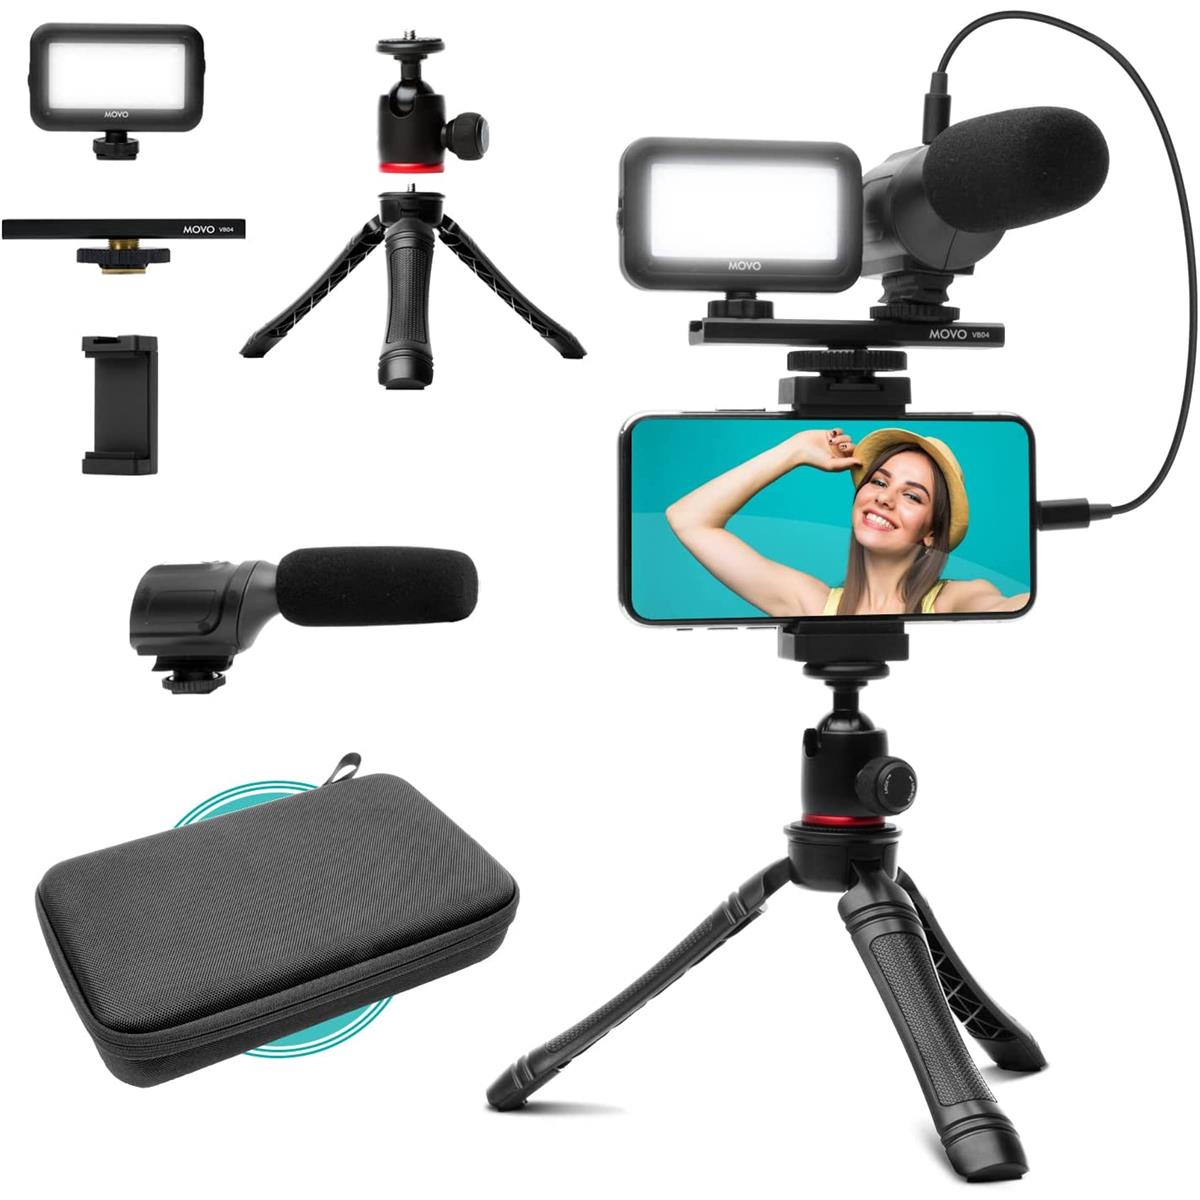 Image of Movo Photo uVlogger Vlogging Kit for Android Smartphone